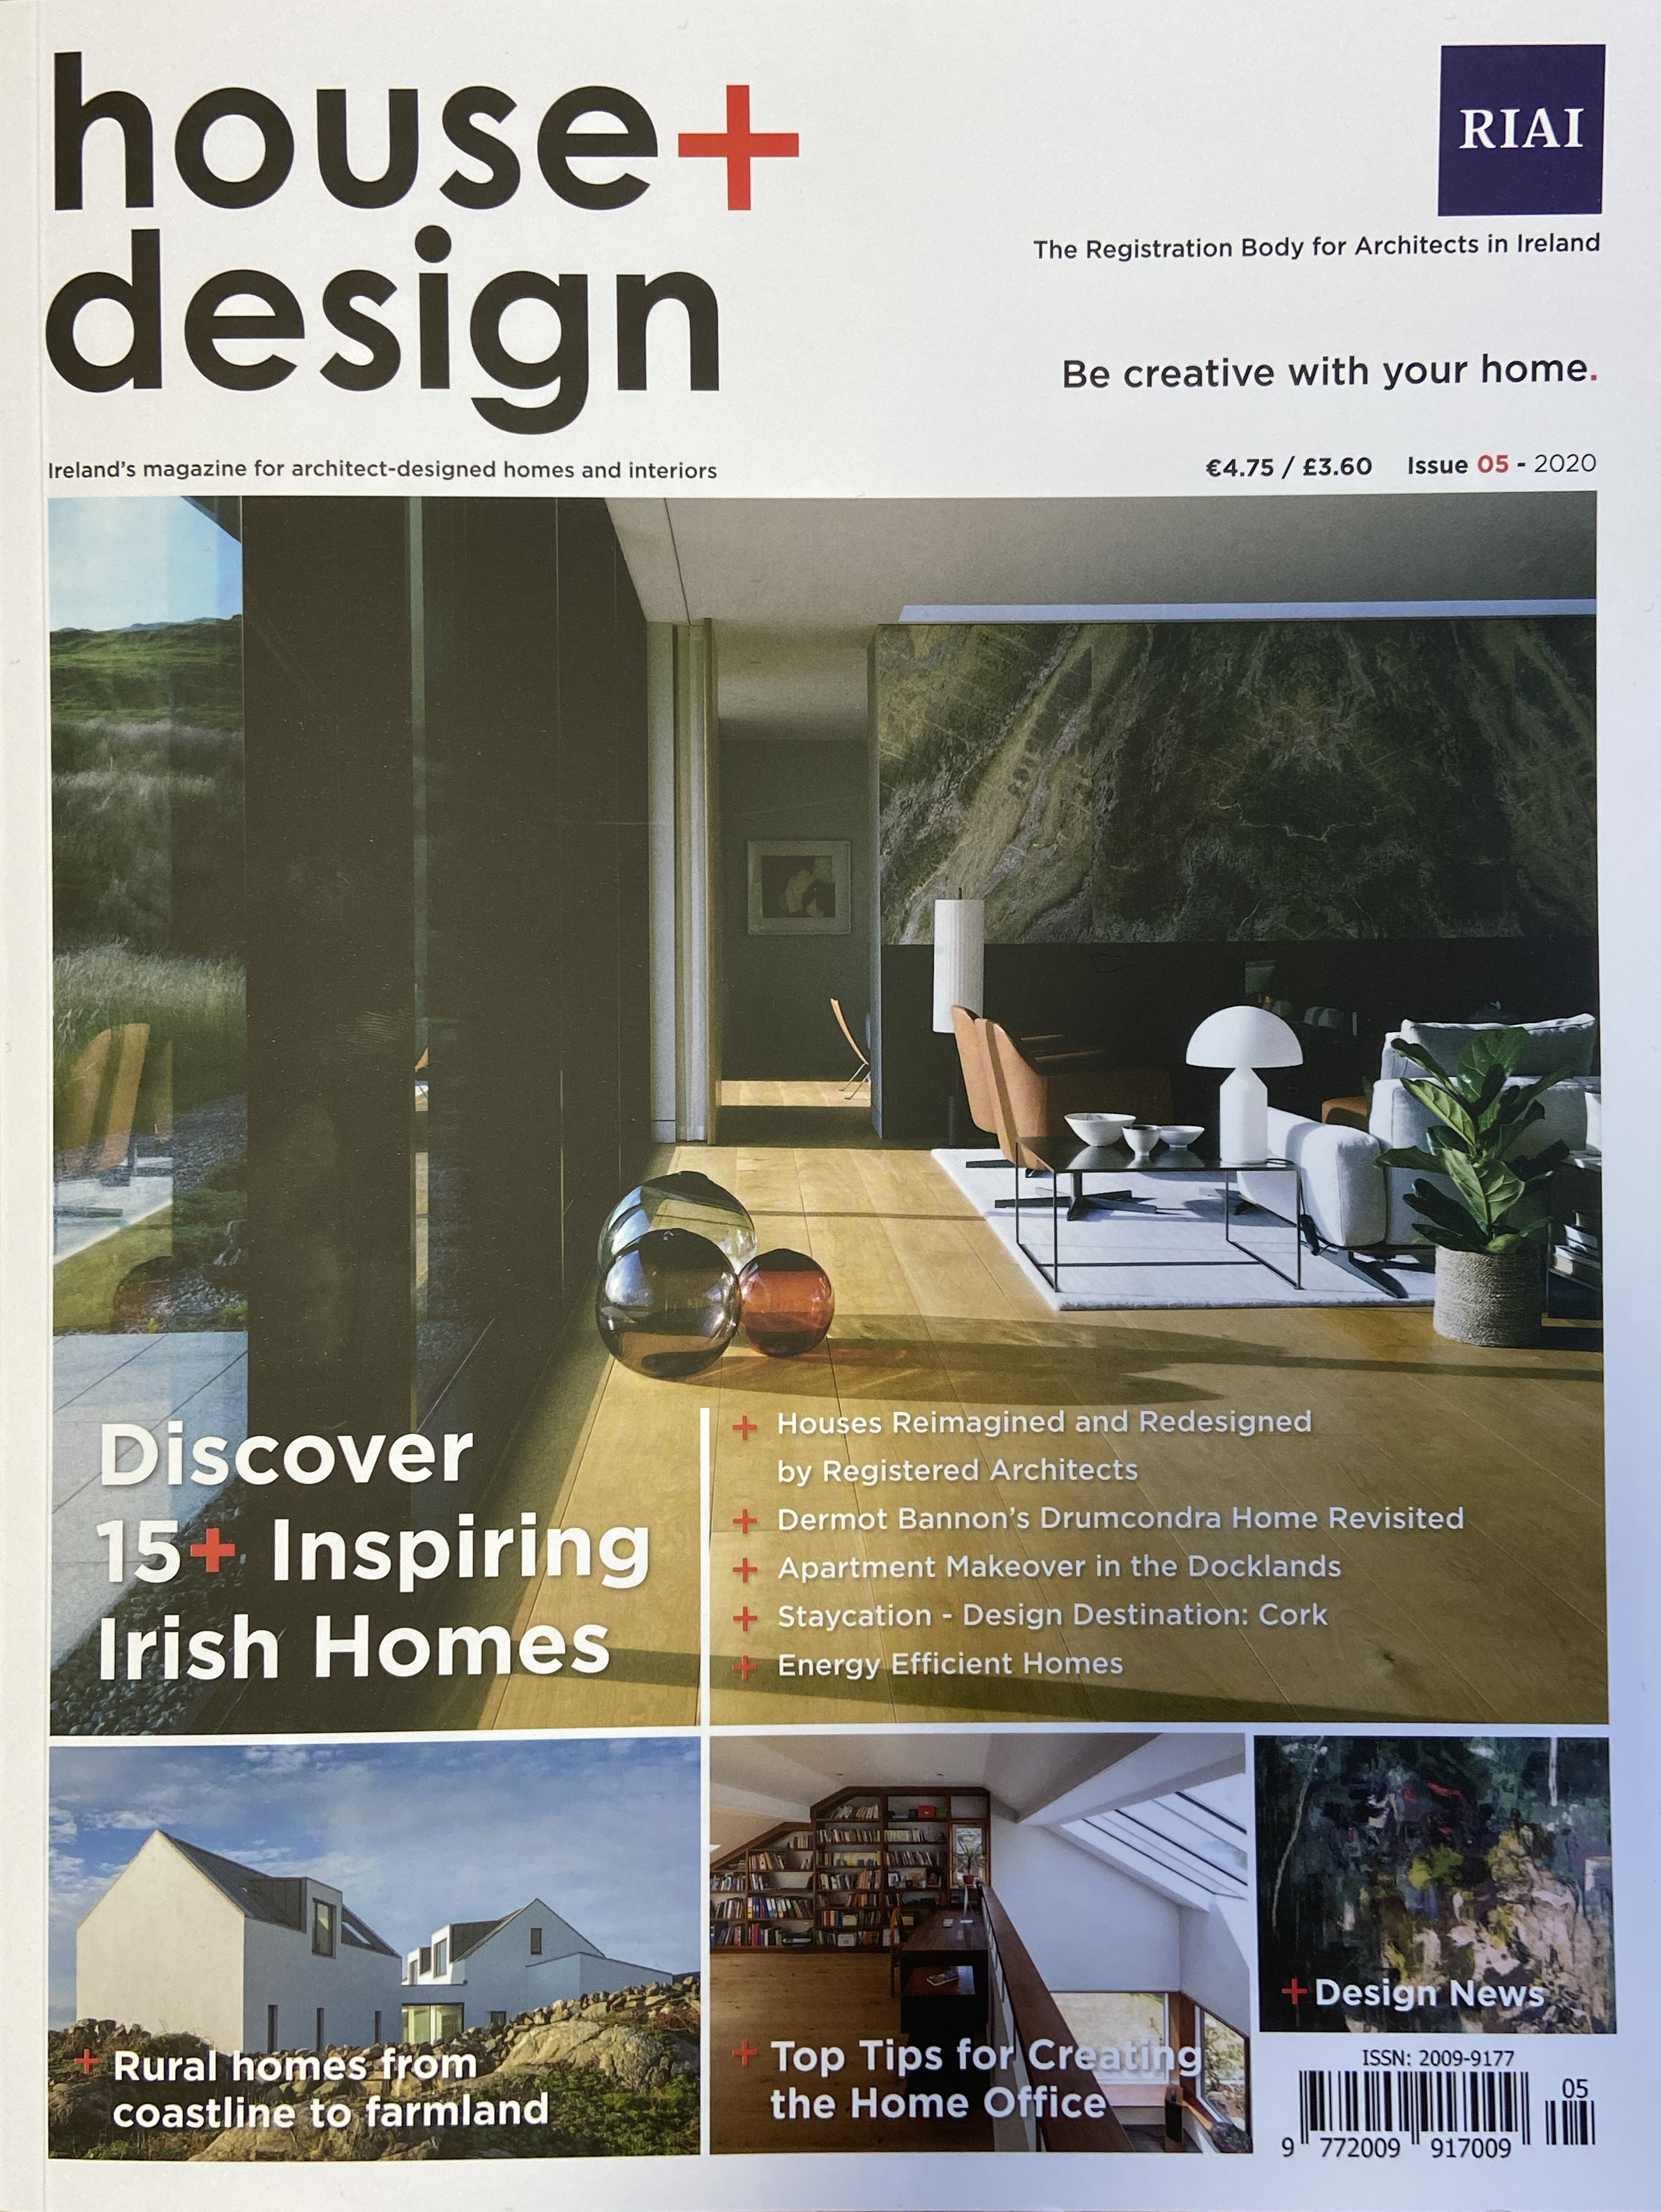 house+design 05 2020 cover.png